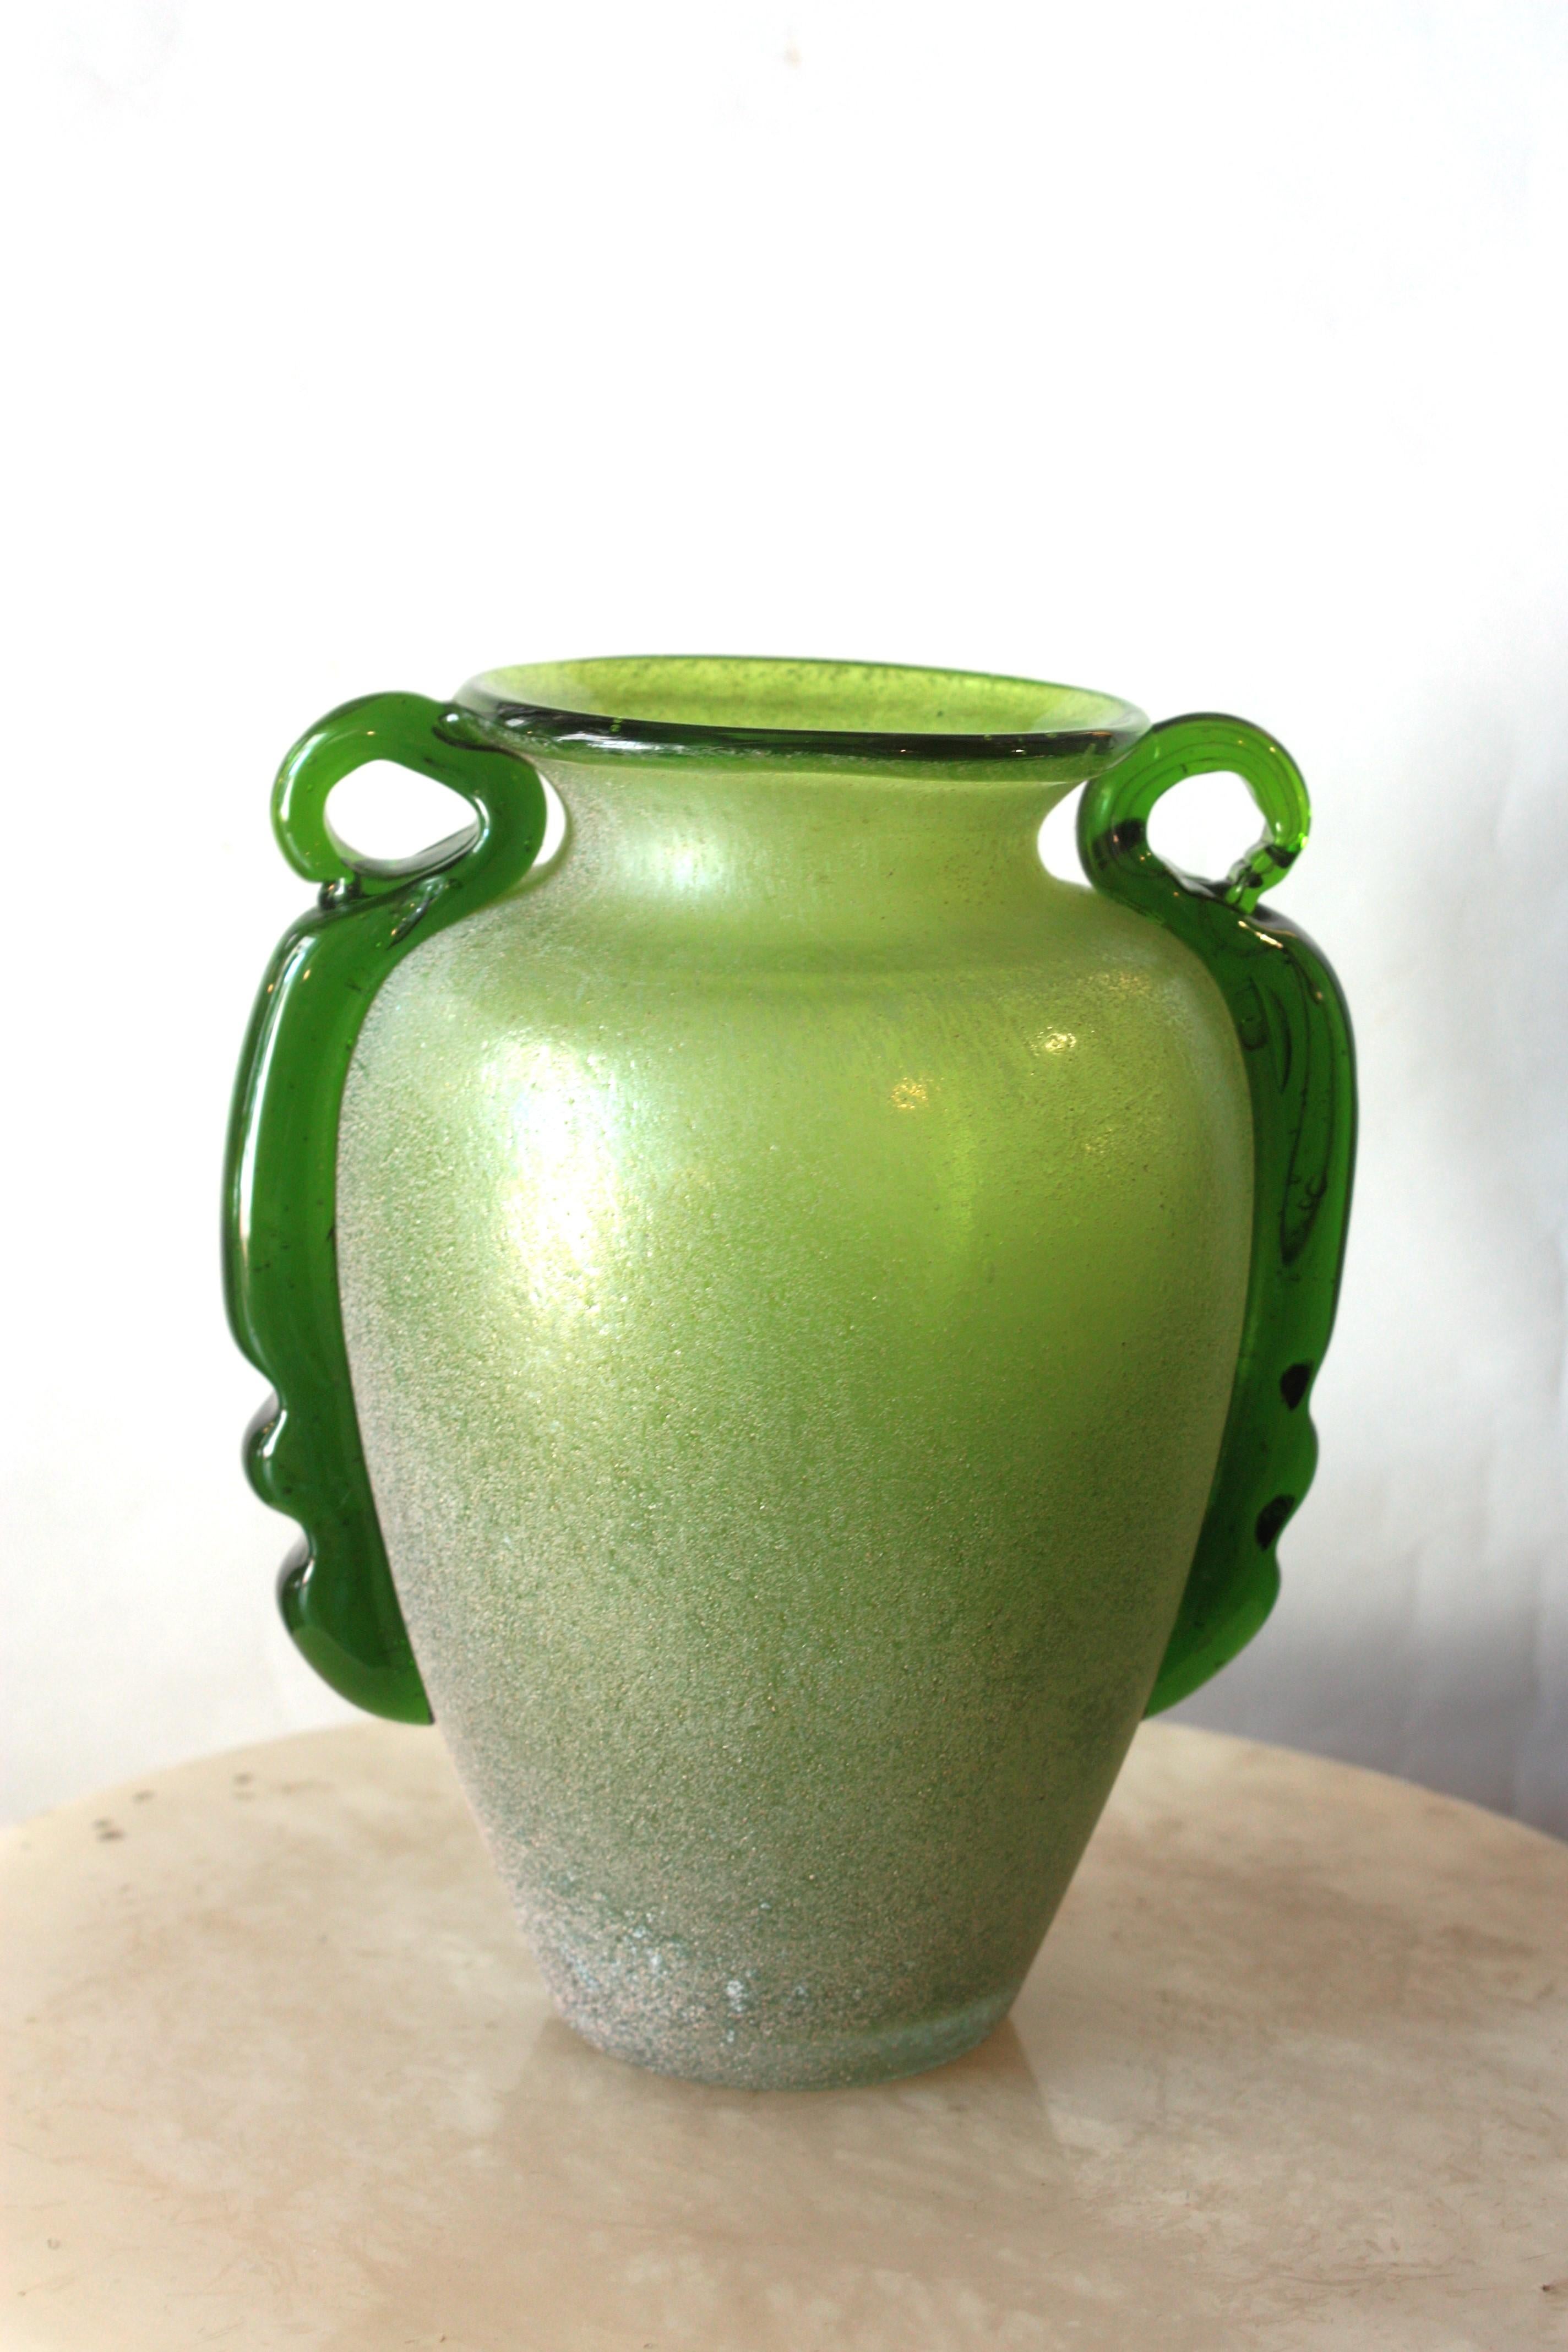 Carlo Moretti Green Scavo Corroso Art Glass Vase with Handles
Hand blown Murano glass scavo bianco corroso vase in acid green color with applied dark green handles. Attributed to Carlo Moretti, Italy, 1960s.
This eye-catching Murano glass bottle